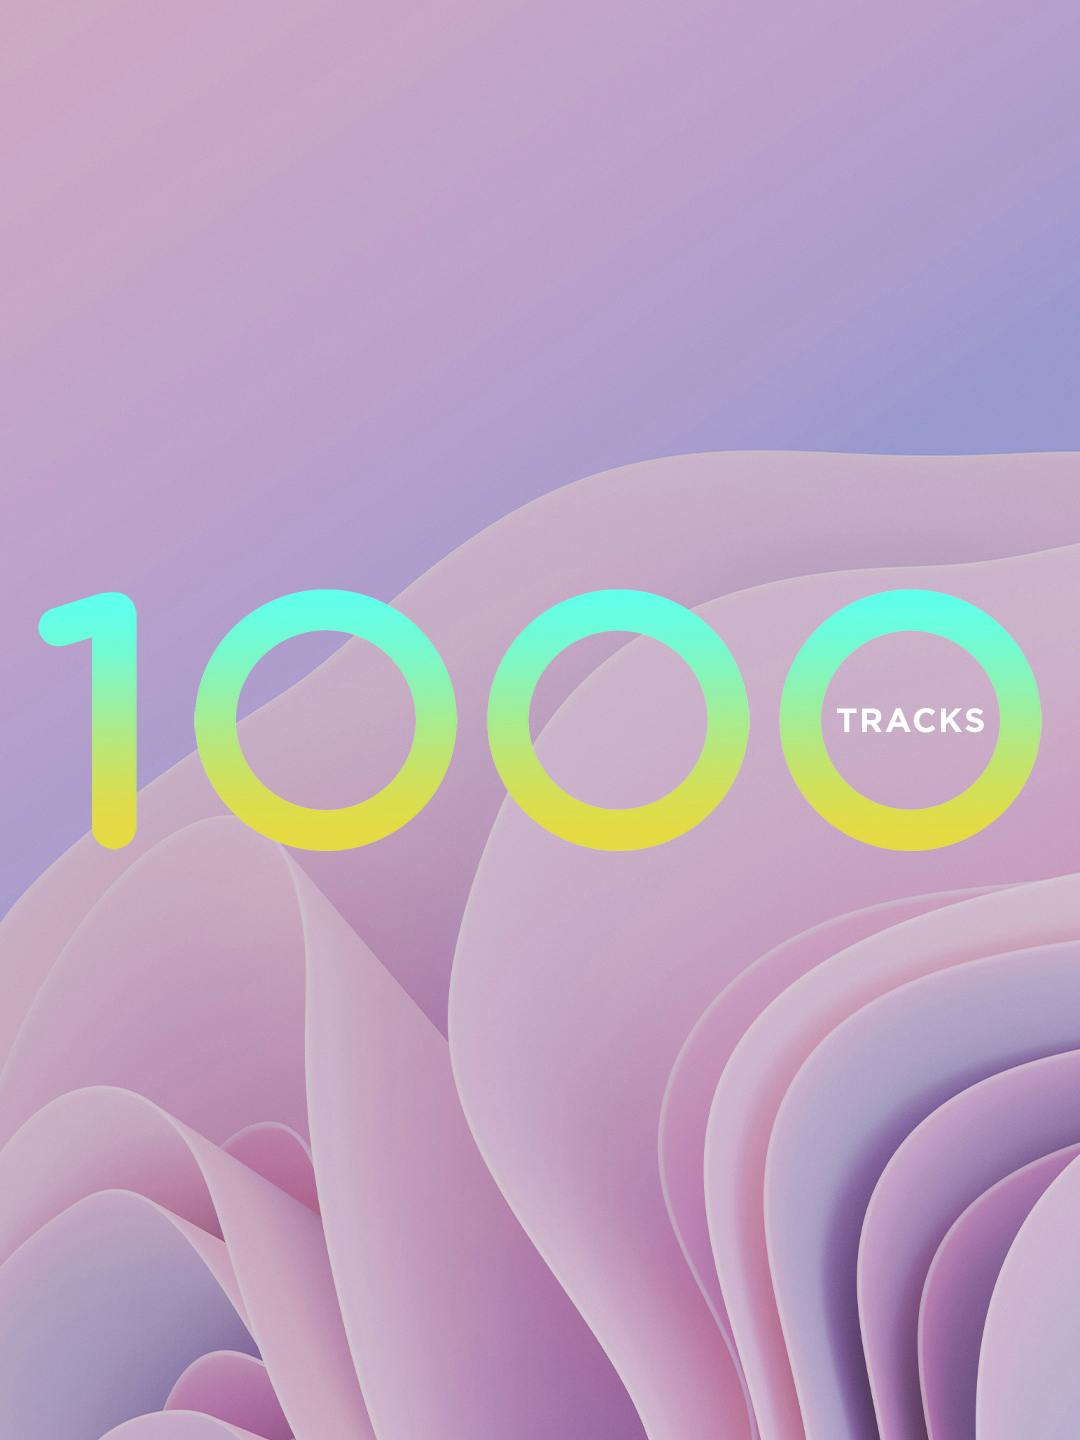 Pixellu SmartSlides now has over 1000 fully licensed soundtracks for photogaphers to make professional slideshows with.